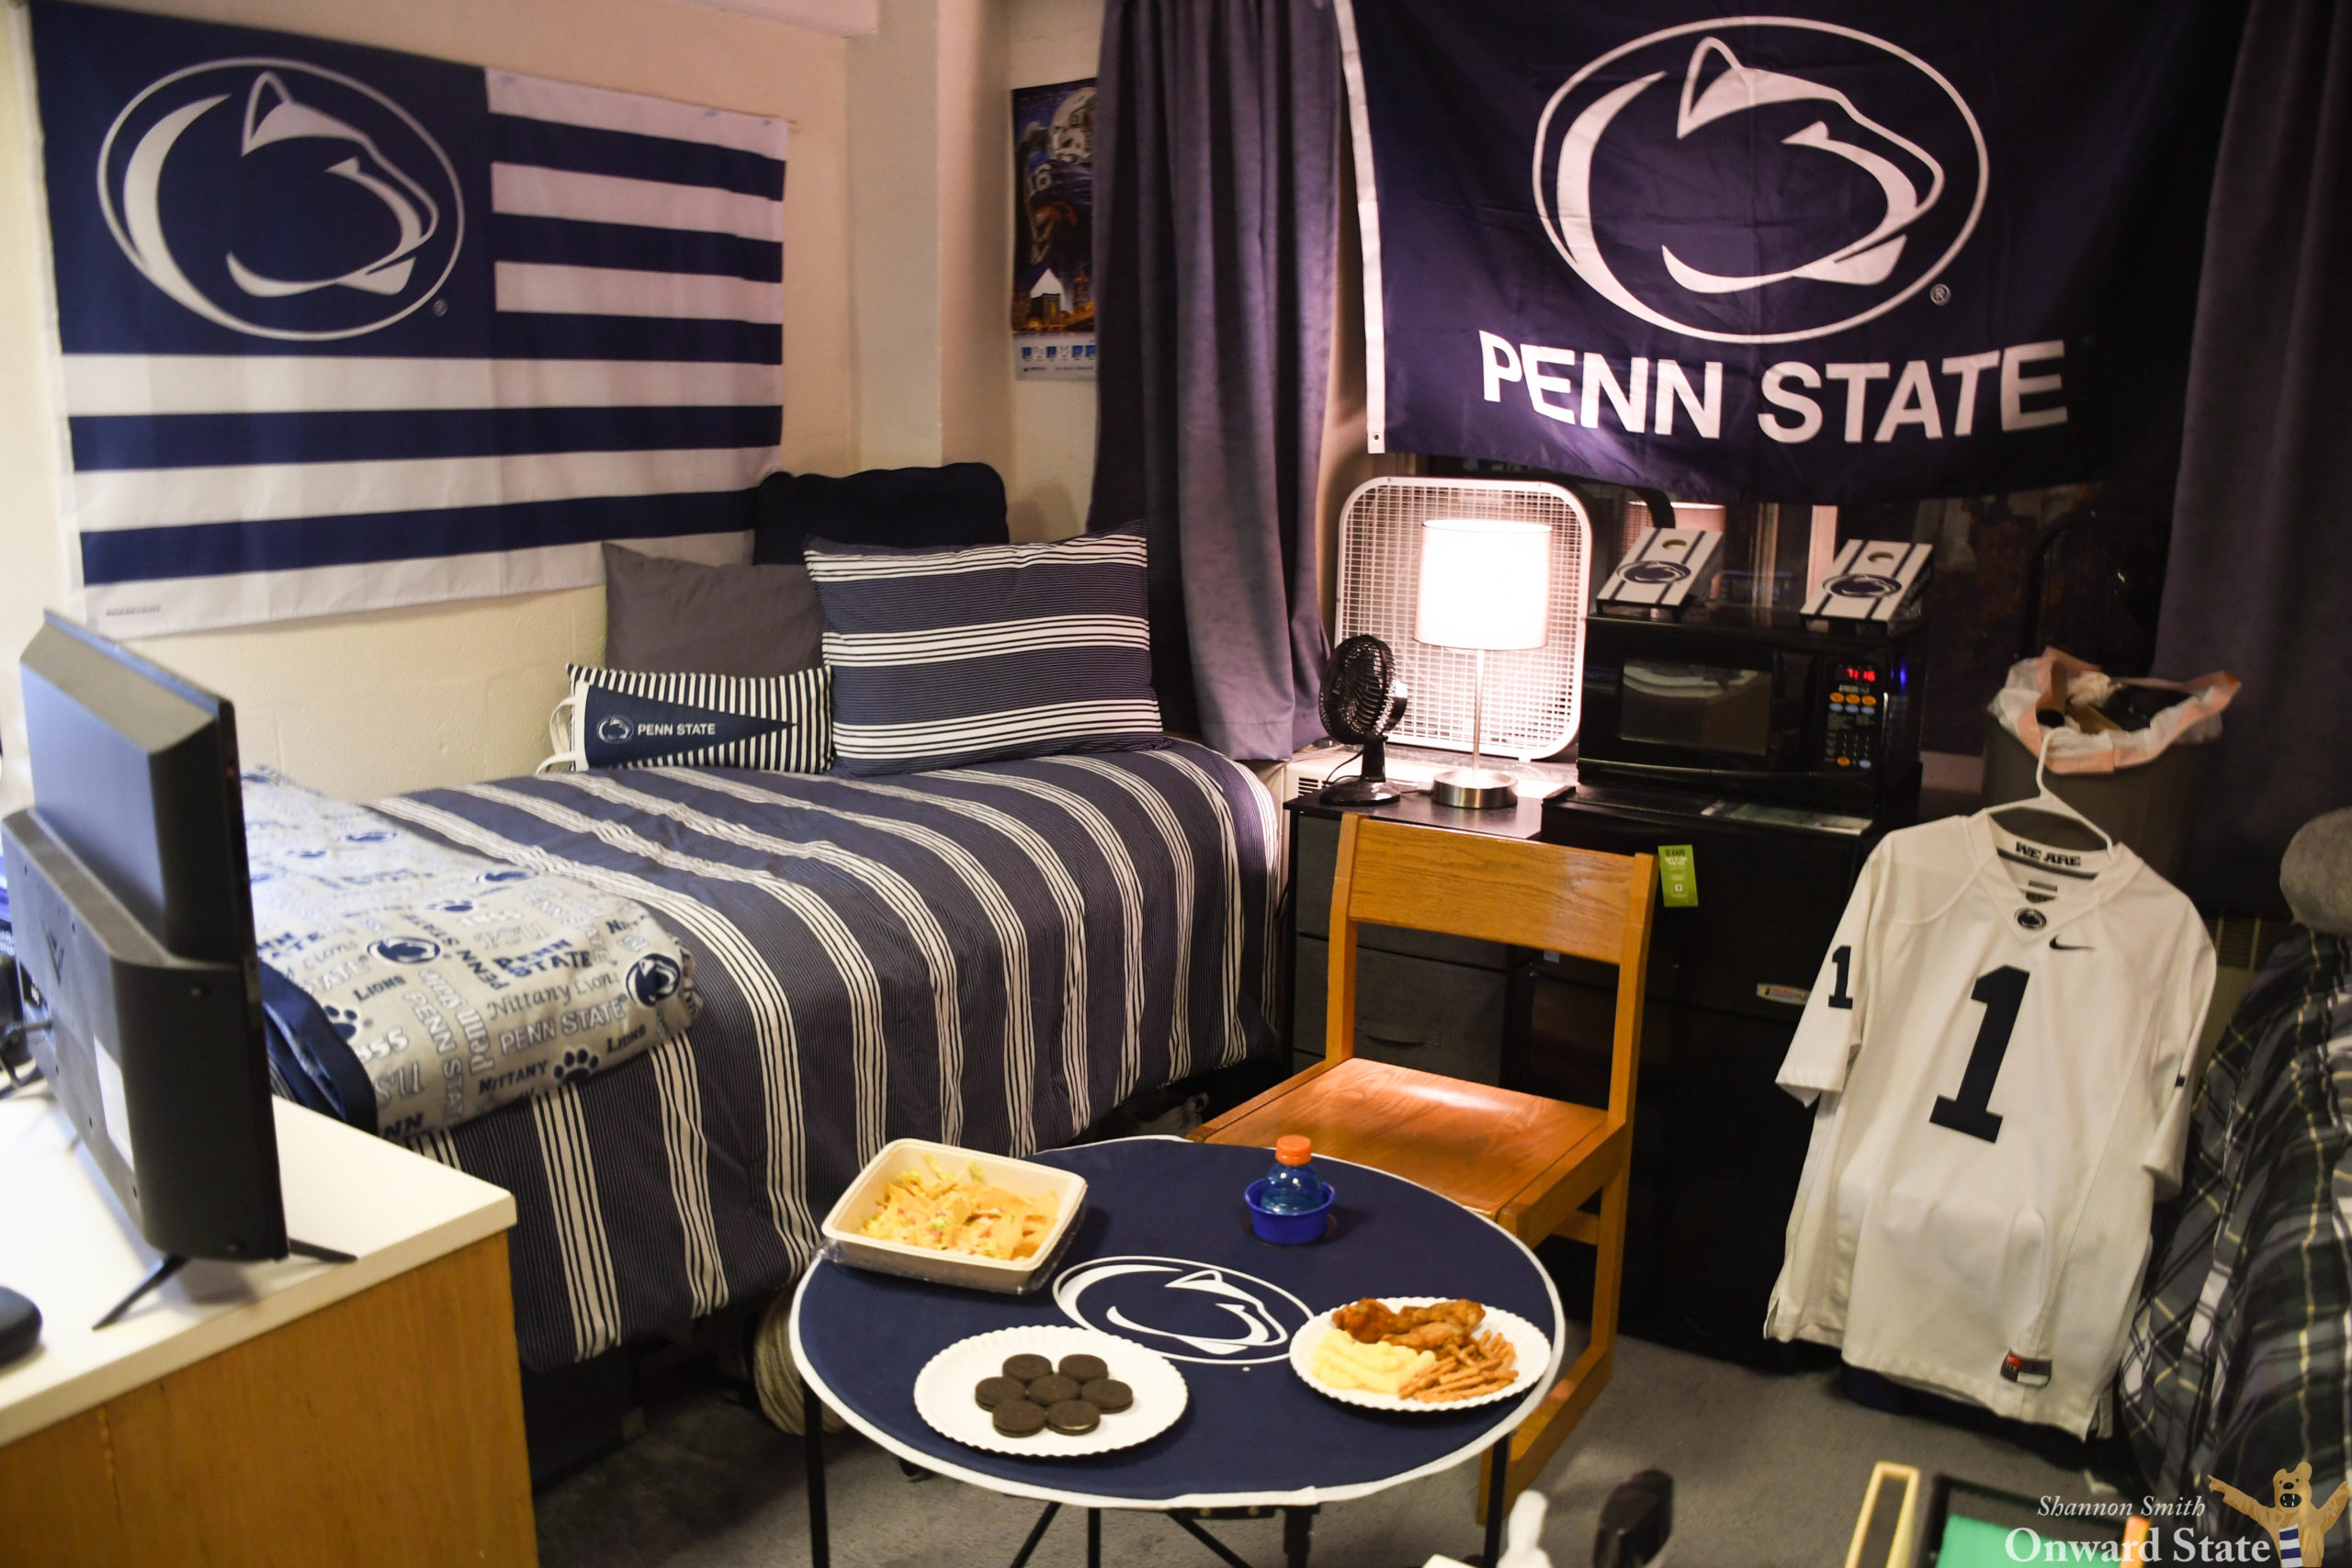 Penn State university admissions